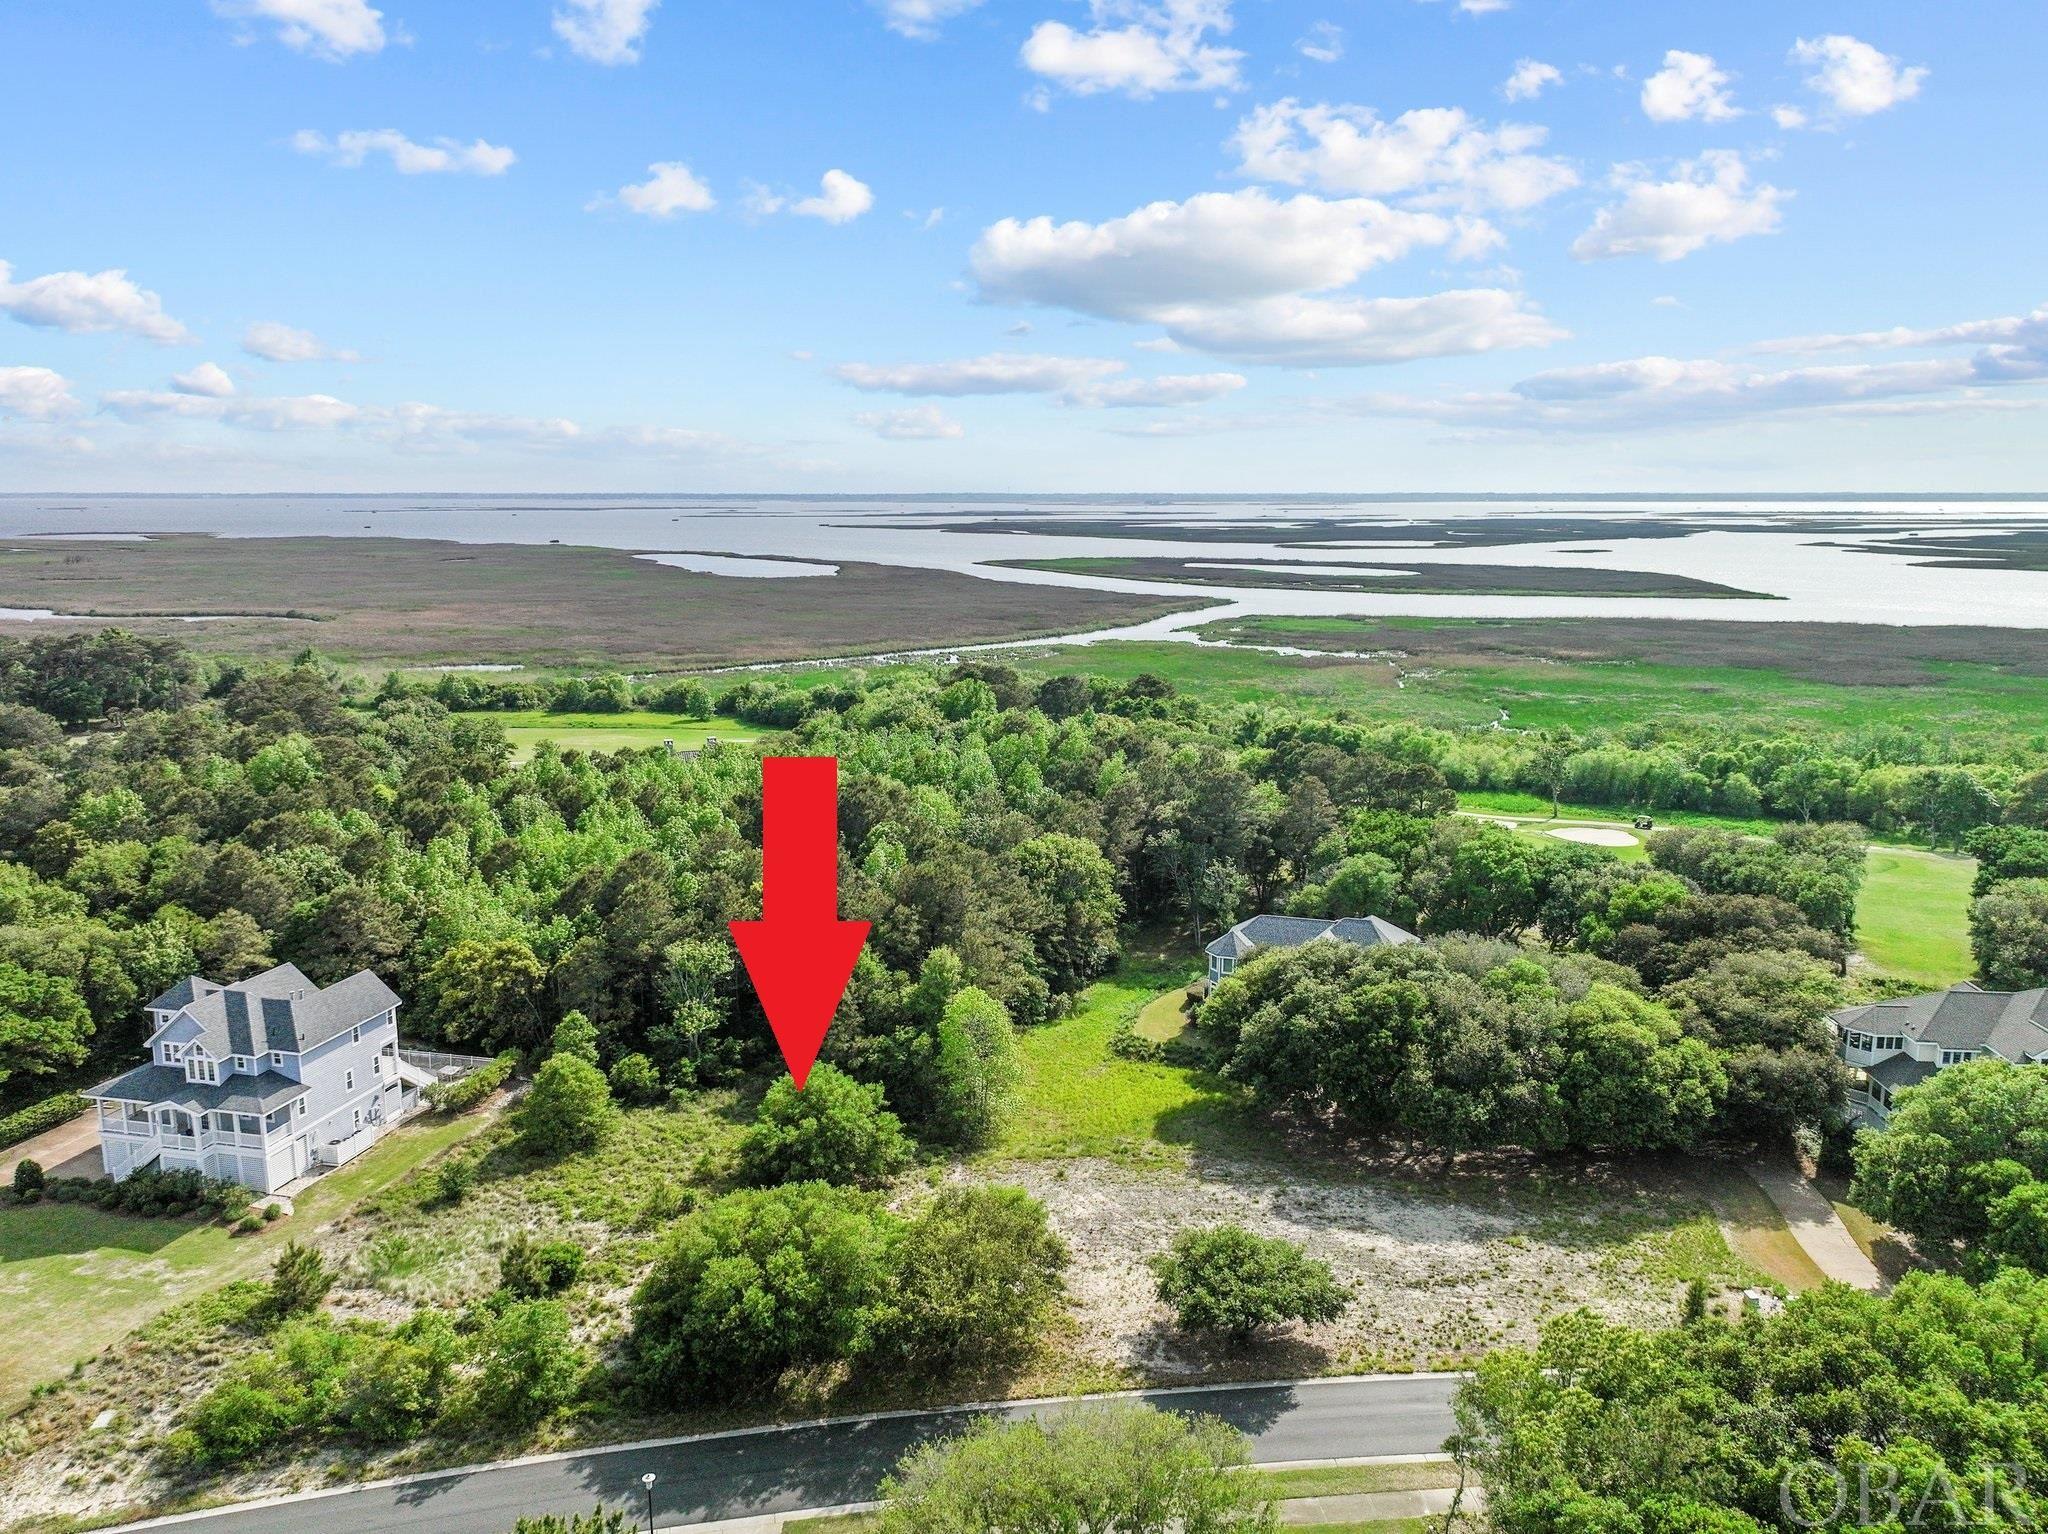 If you cannot find a perfect home for you and your family, there is an option - consider building one! This huge lot in The Currituck Club, Corolla NC may just be the place for your next beach home. If you are not familiar with this premier, gated community that stretches alongside The Currituck Sound, you will find that it is beautifully landscaped and offers amenities for everyone in the family. There are three community pools, a fitness center, basketball court, shuffleboards, tennis courts, in season trolley service that can take you to the beach access and in season valet service. Not to forget, a world-class golf course designed by the legendary Rees Jones that will satisfy any golf enthusiast.  The lot can offer you exactly what you are looking for as far as privacy and possibly sounds views. It is located between the 16th and 17th hole and you would be guaranteed not to have any dwellings between the lot and The Currituck Sound. It is also in X flood zone, which means that the flood insurance will not be required. Corolla is the ideal vacation destination for families who are just as happy lounging on the beach as they are indulging in an afternoon at the spa. Come and see for yourself if this is the place where you can start making your own Outer Banks memories.